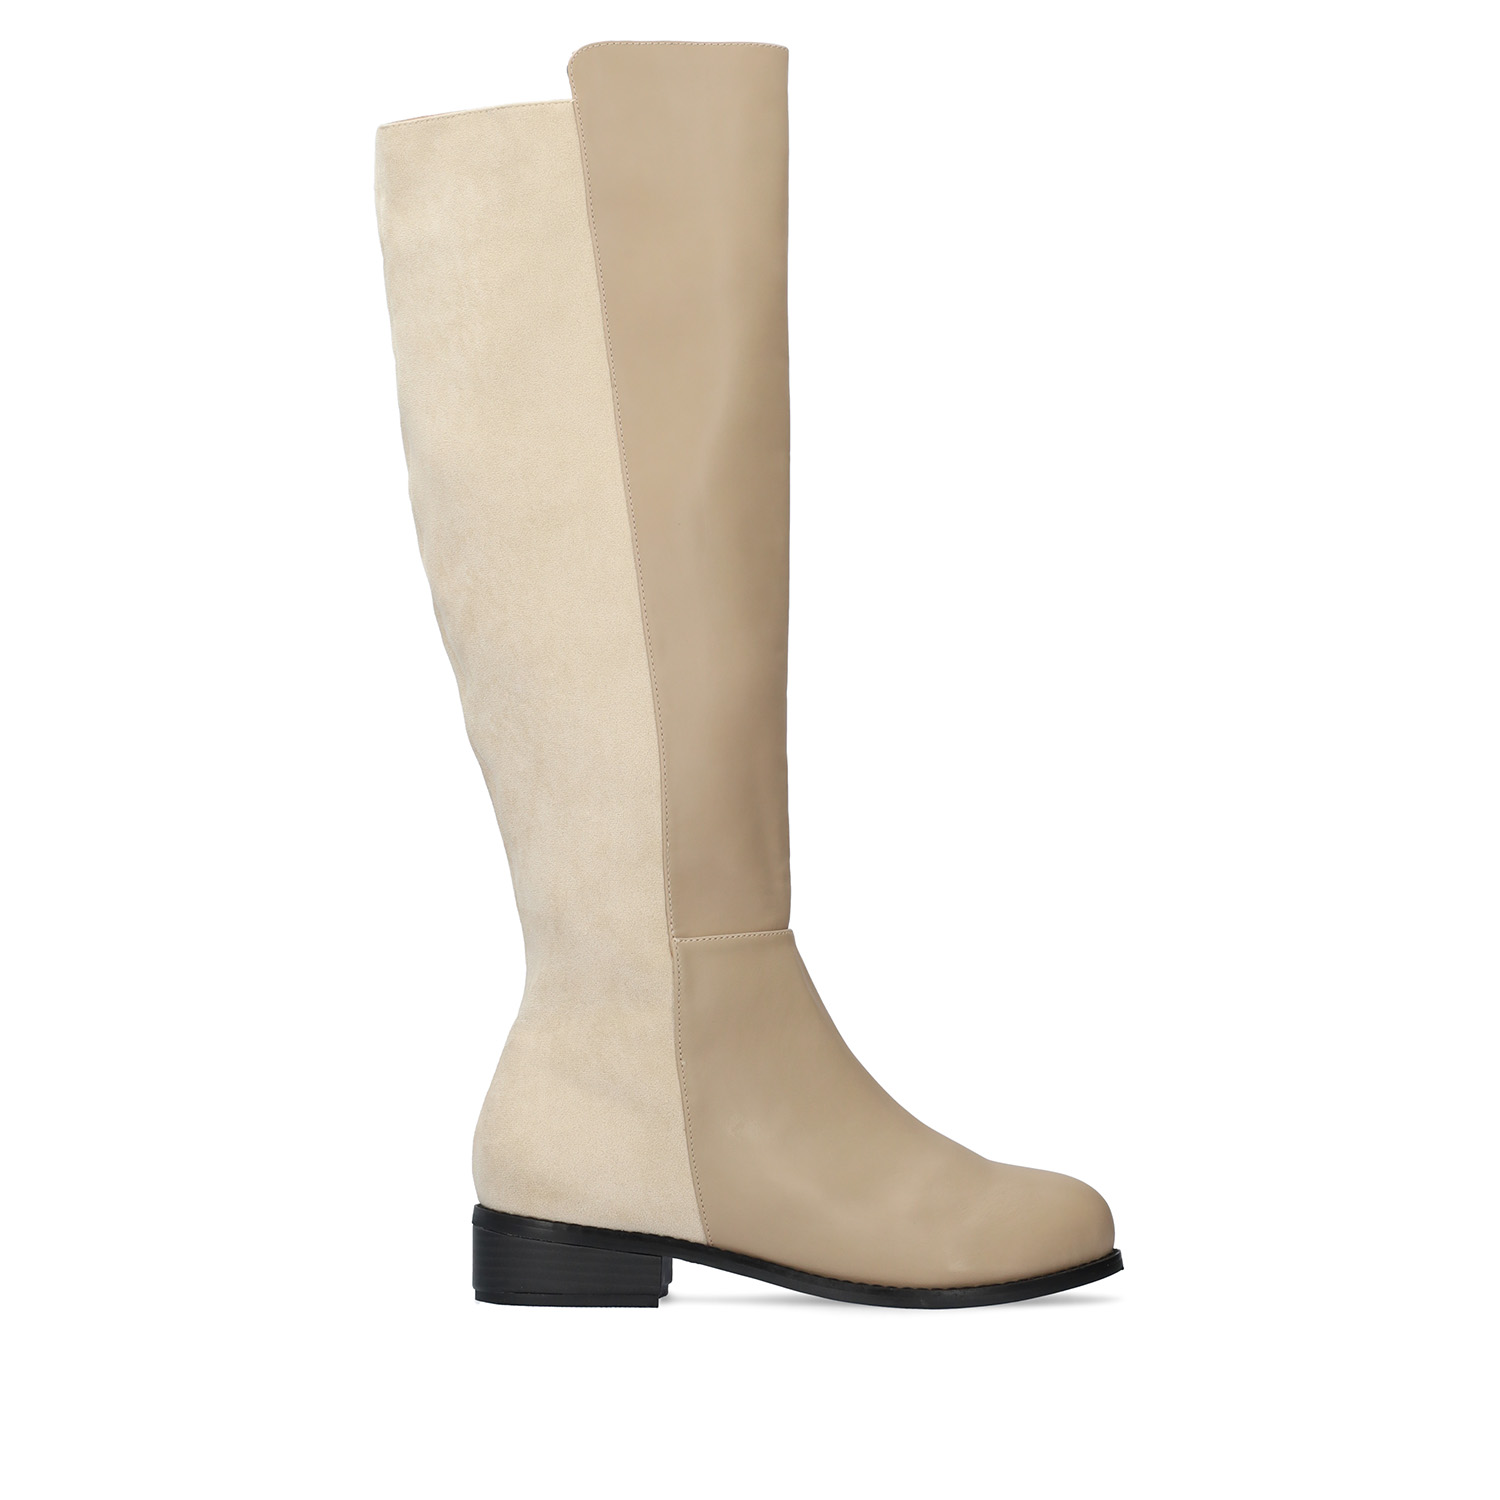 Flat knee-high boots combined in beige colour. 